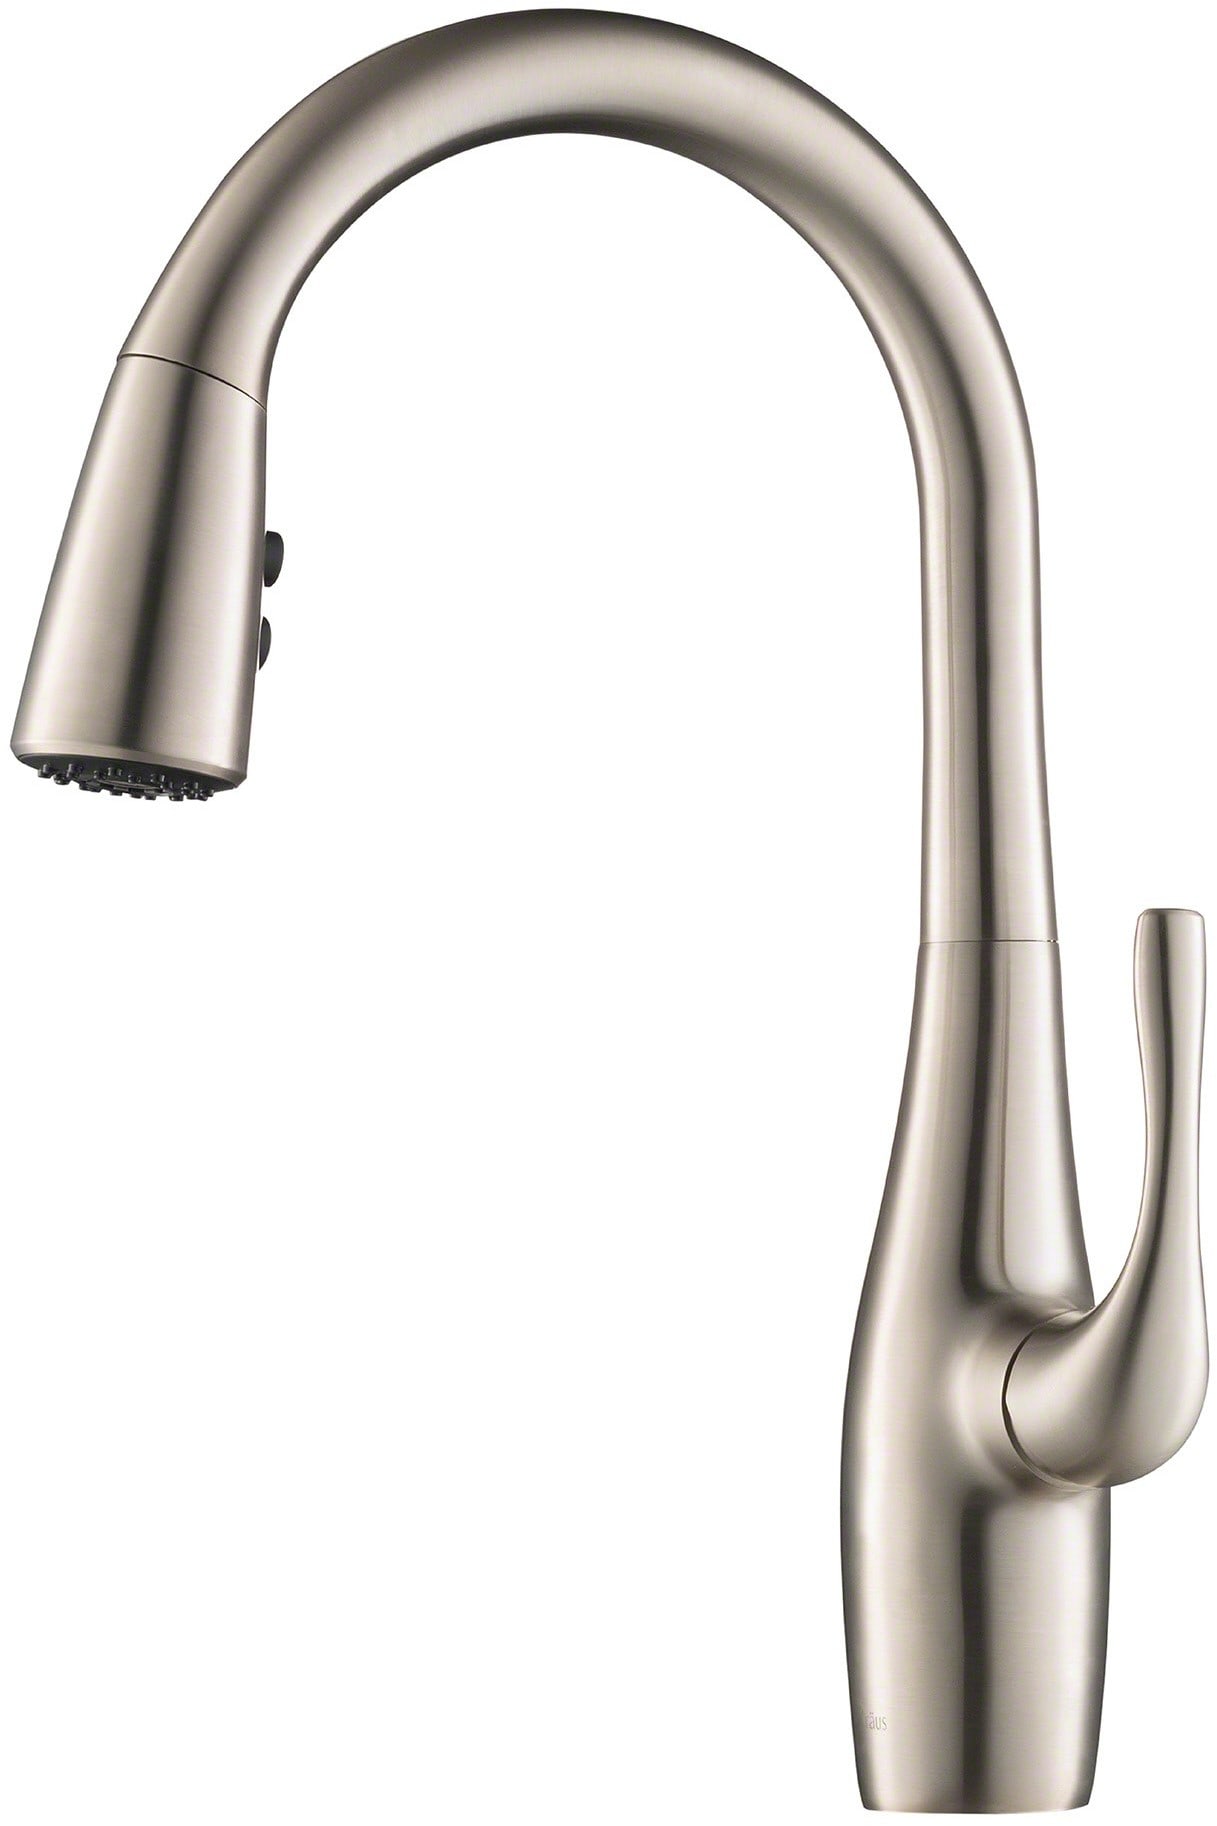 Dual Function Pull-Down Kitchen Faucet